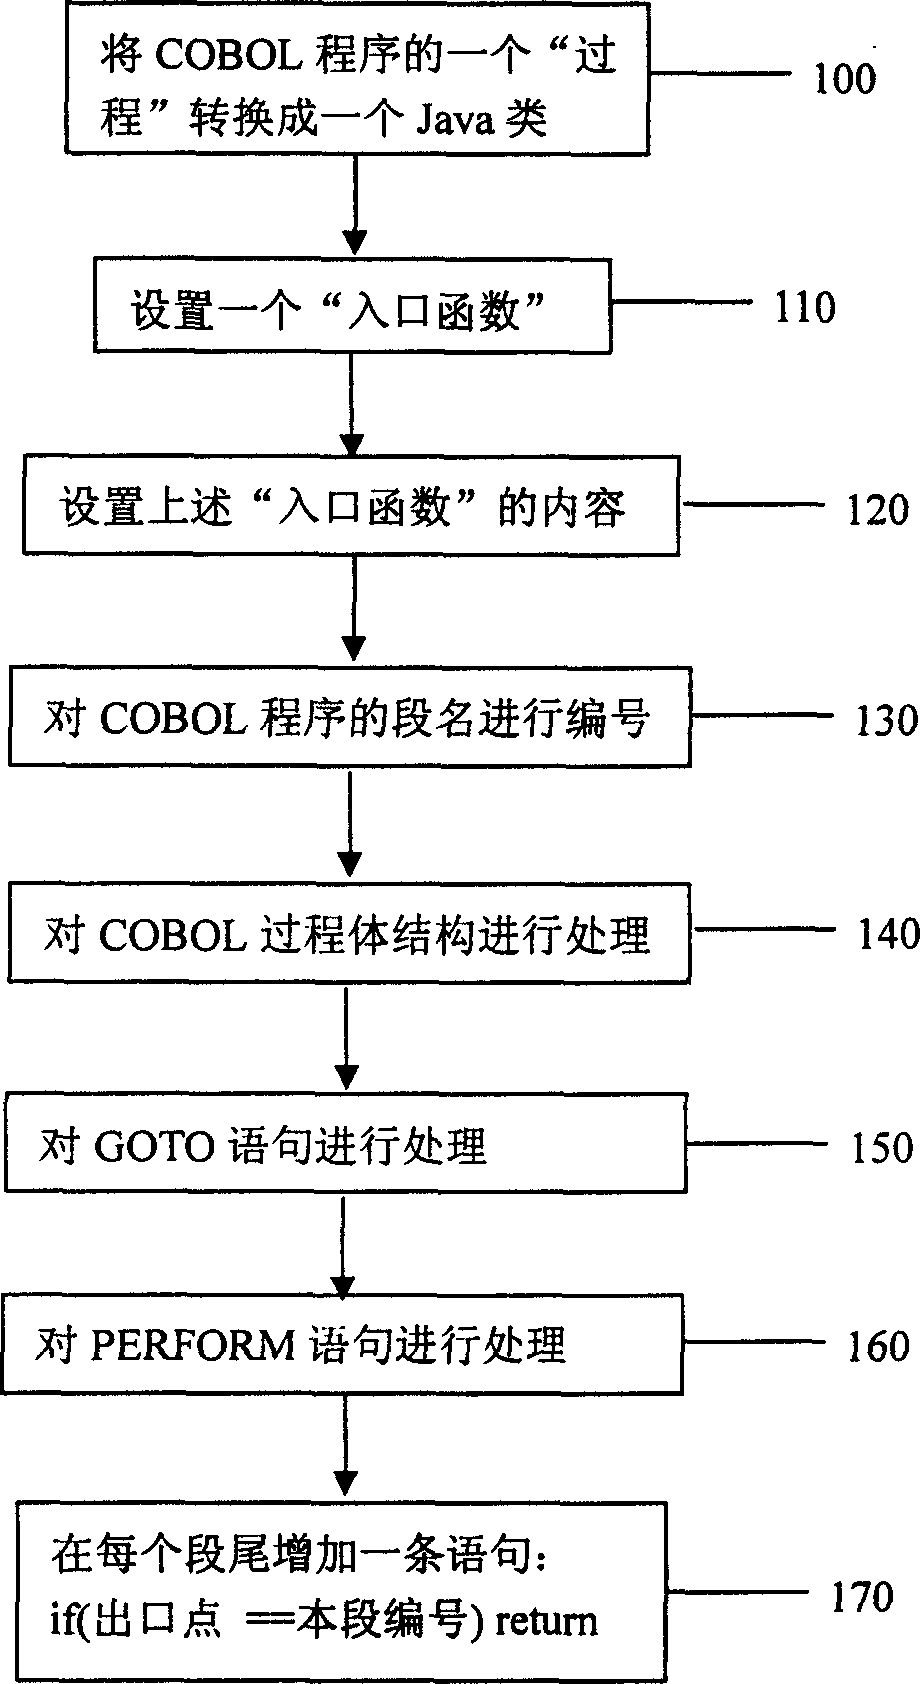 Control flow conversion in course of heritage code into modern language